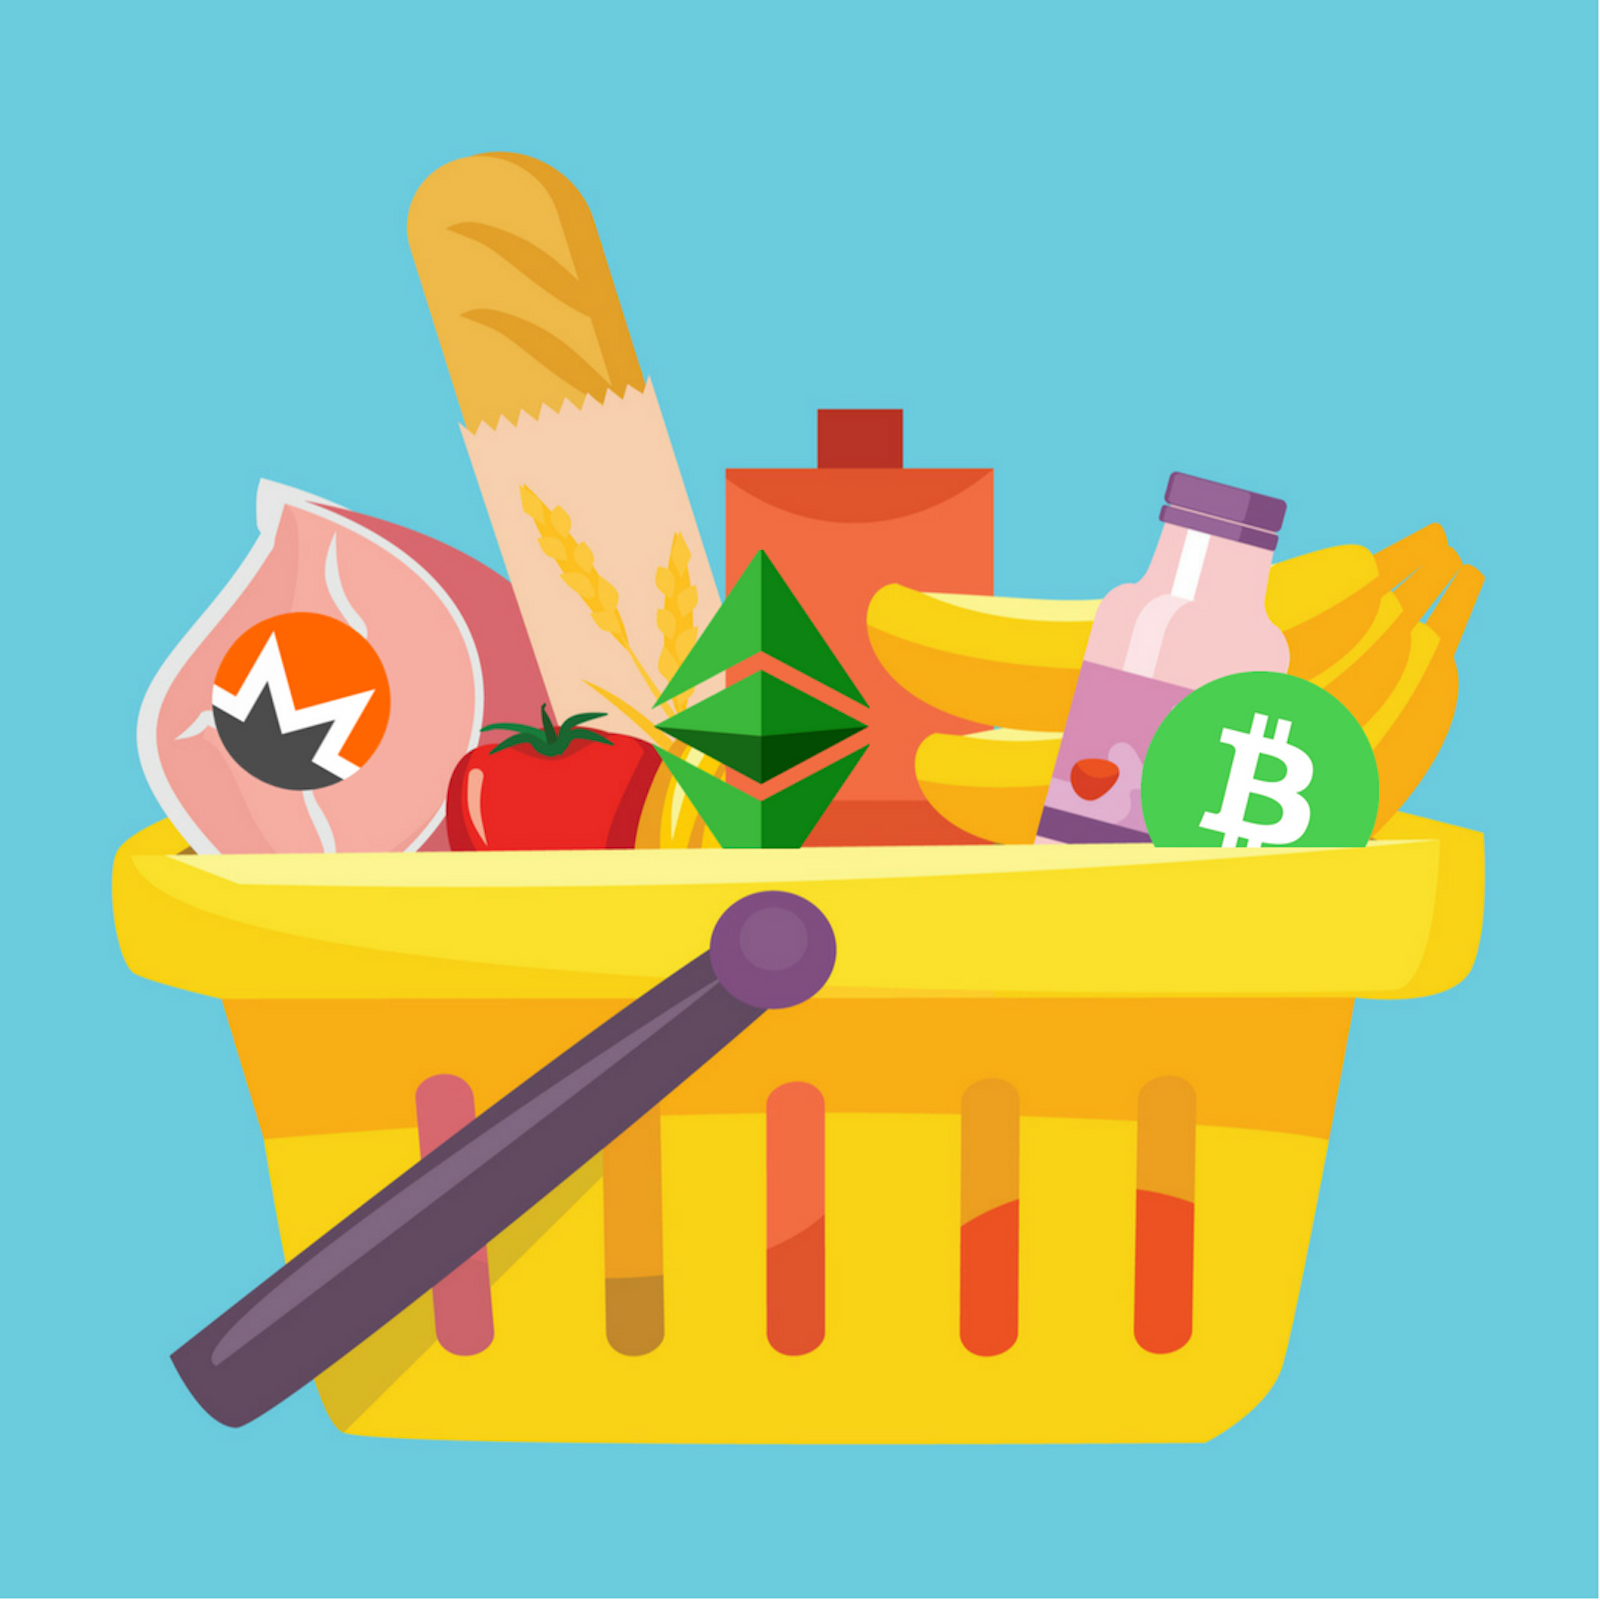 Cryptocurrency Baskets Are Growing in Popularity